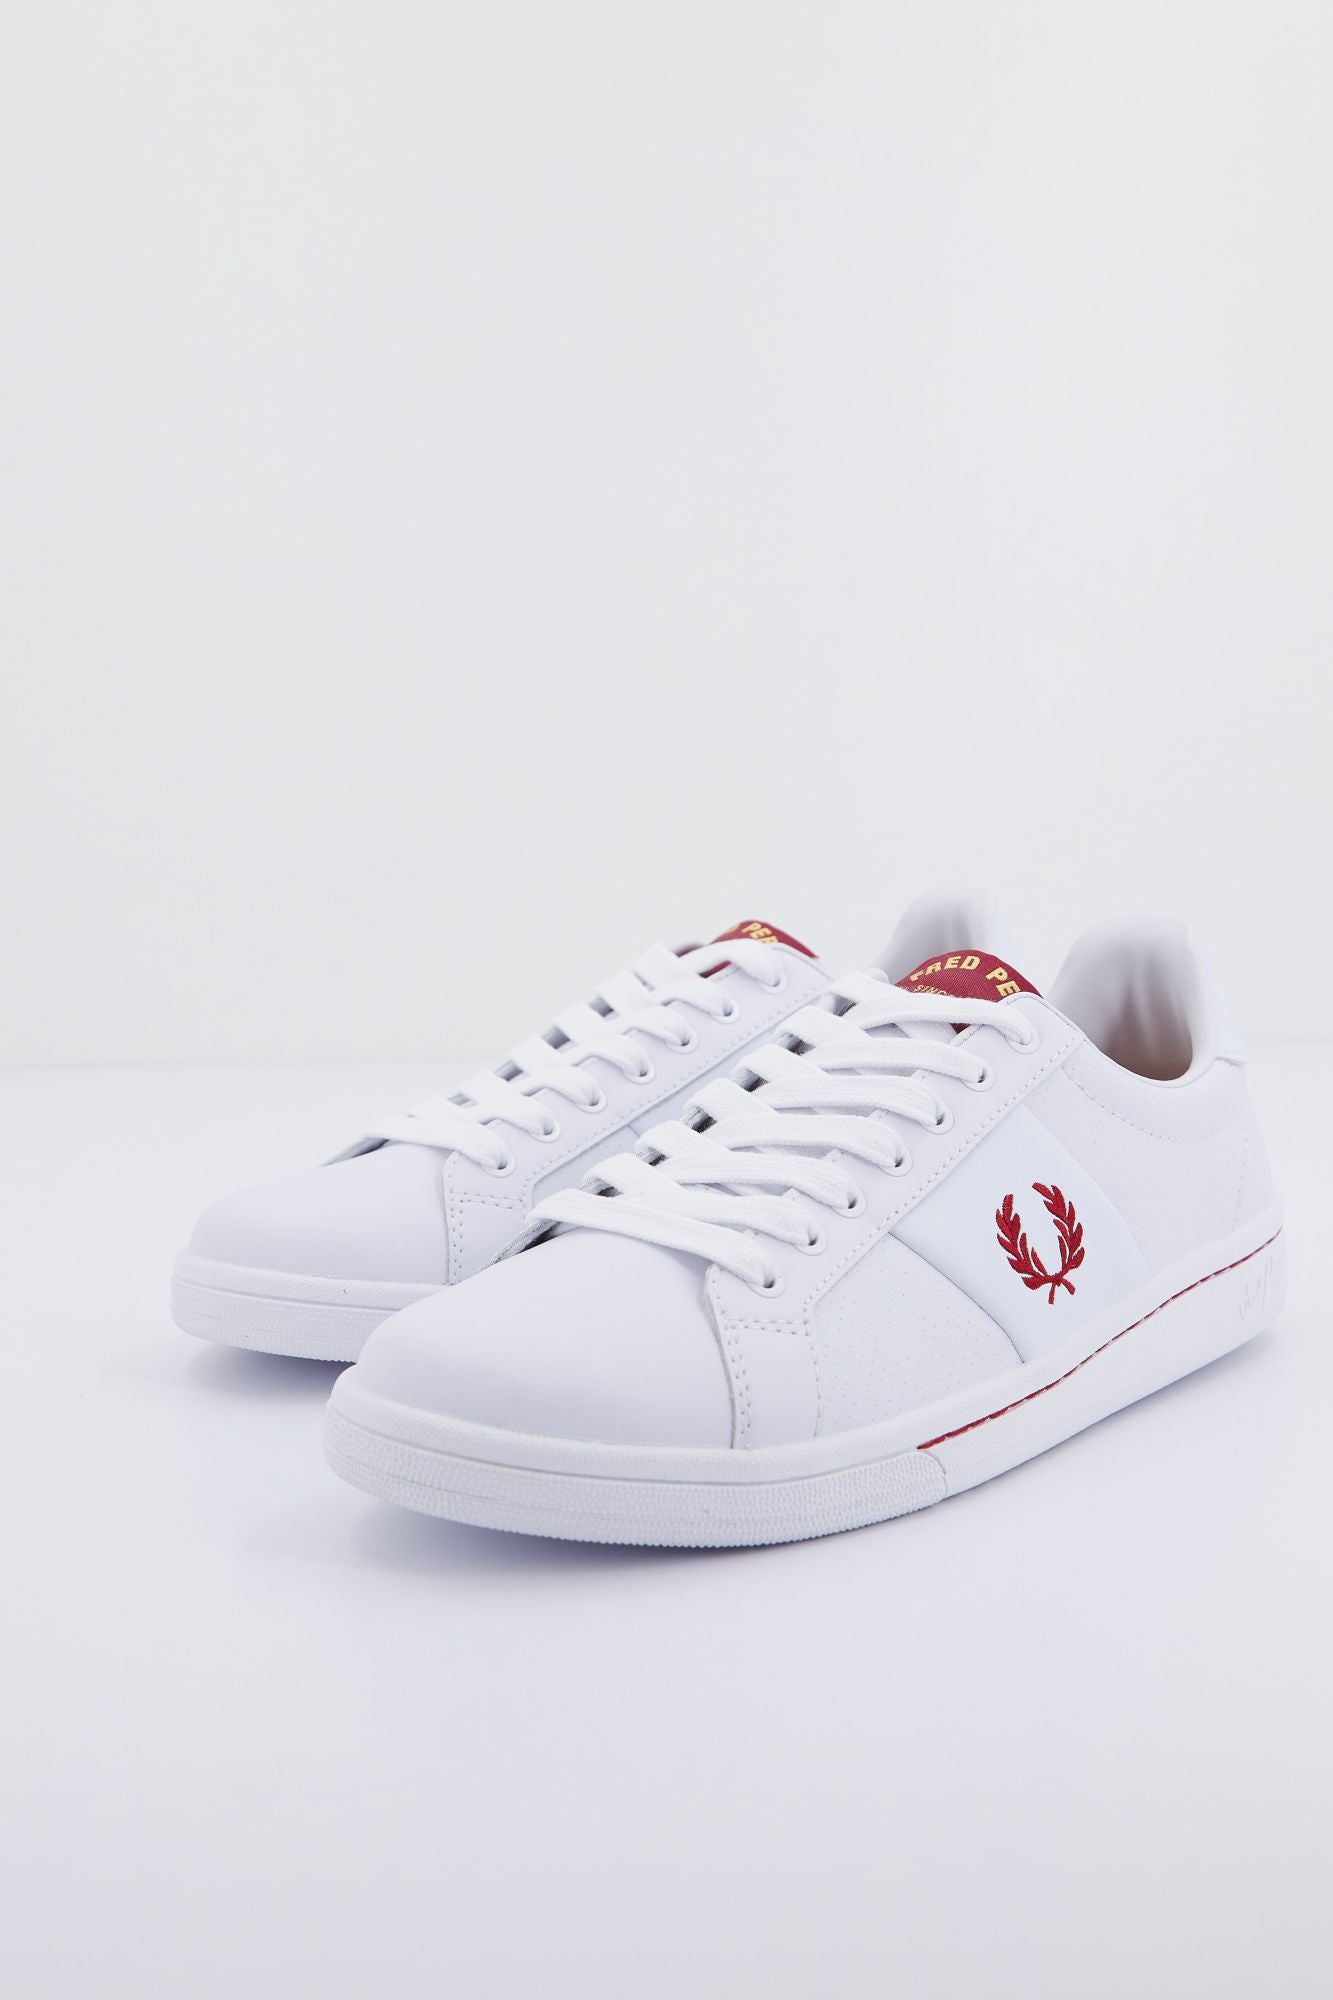 FRED PERRY PERF LEATHER en color BLANCO (2)